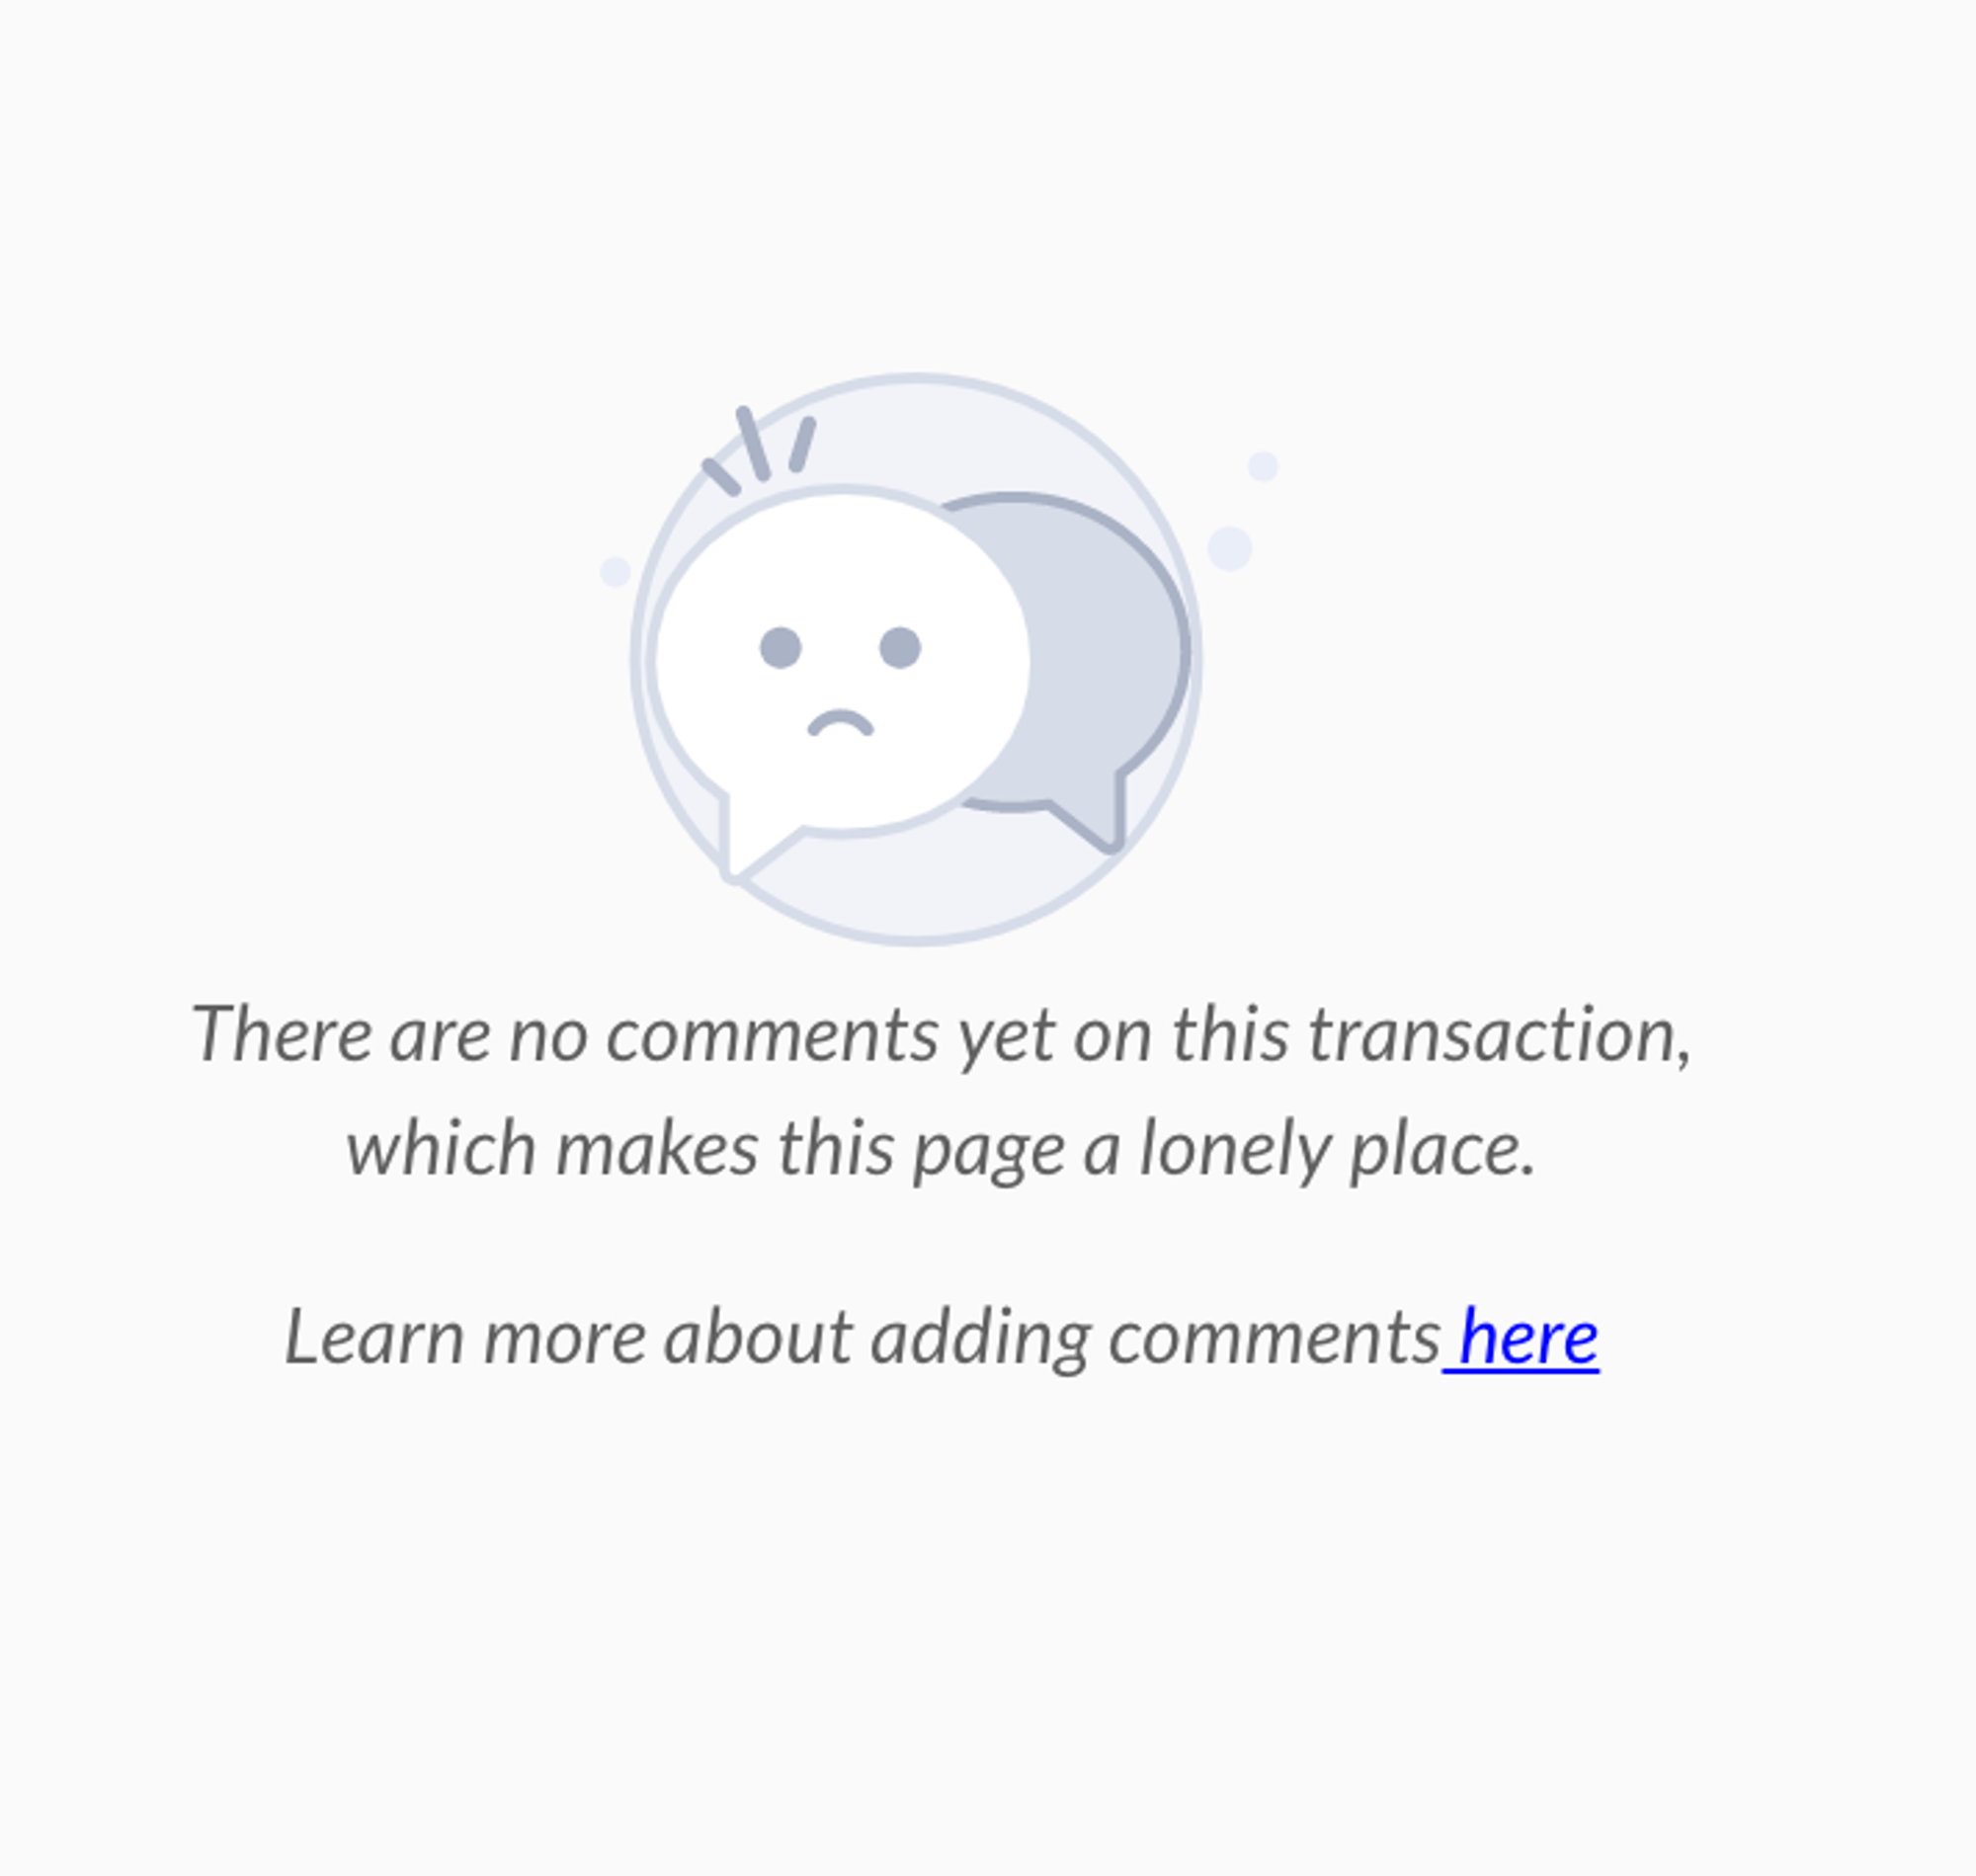 Comments page empty state message